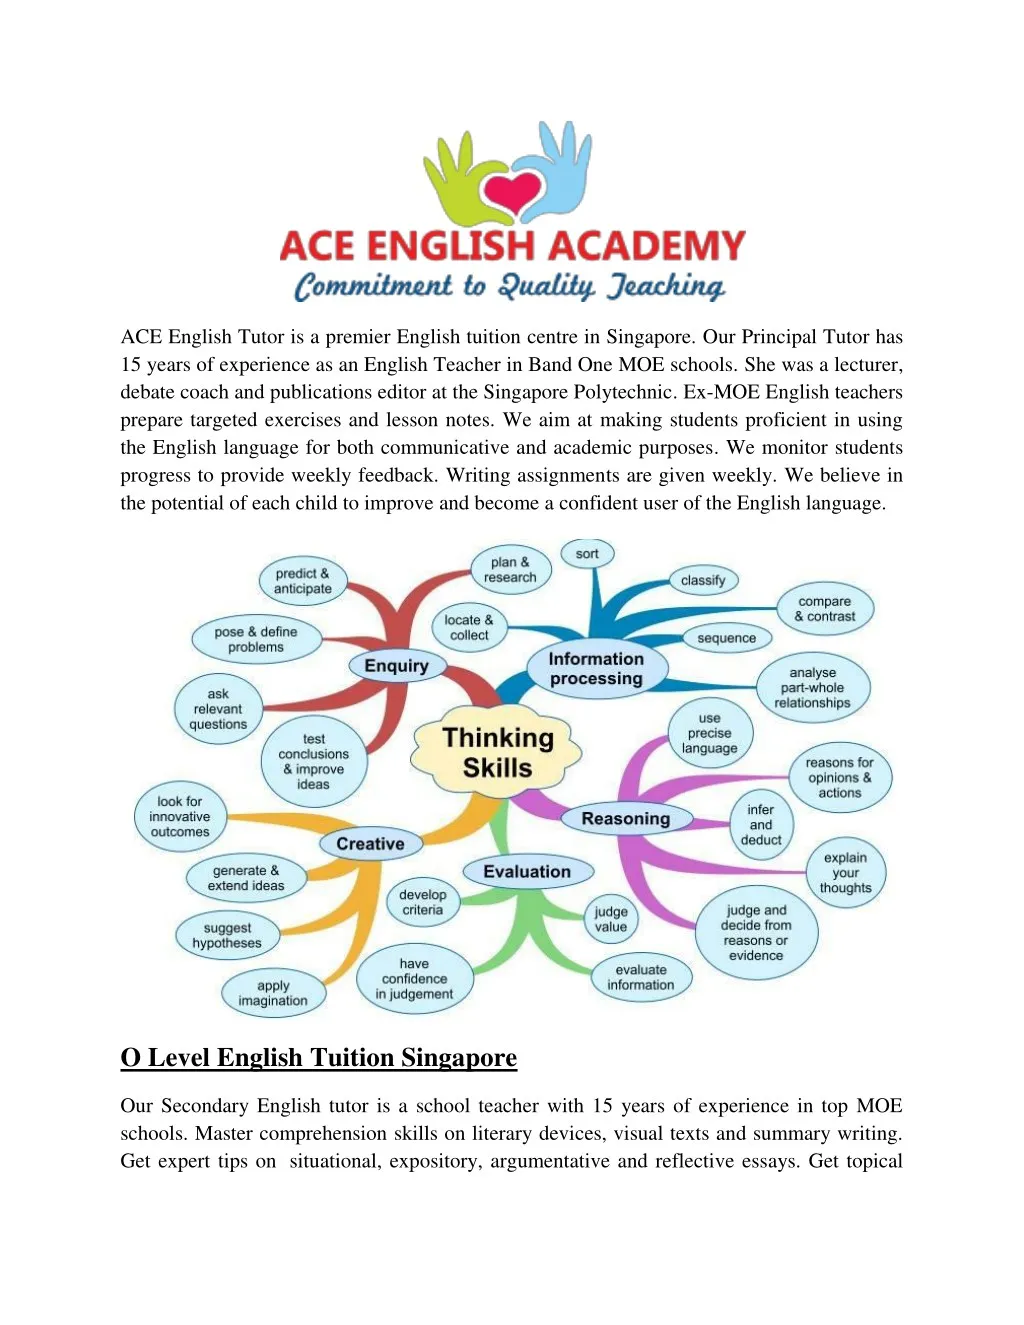 ace english tutor is a premier english tuition